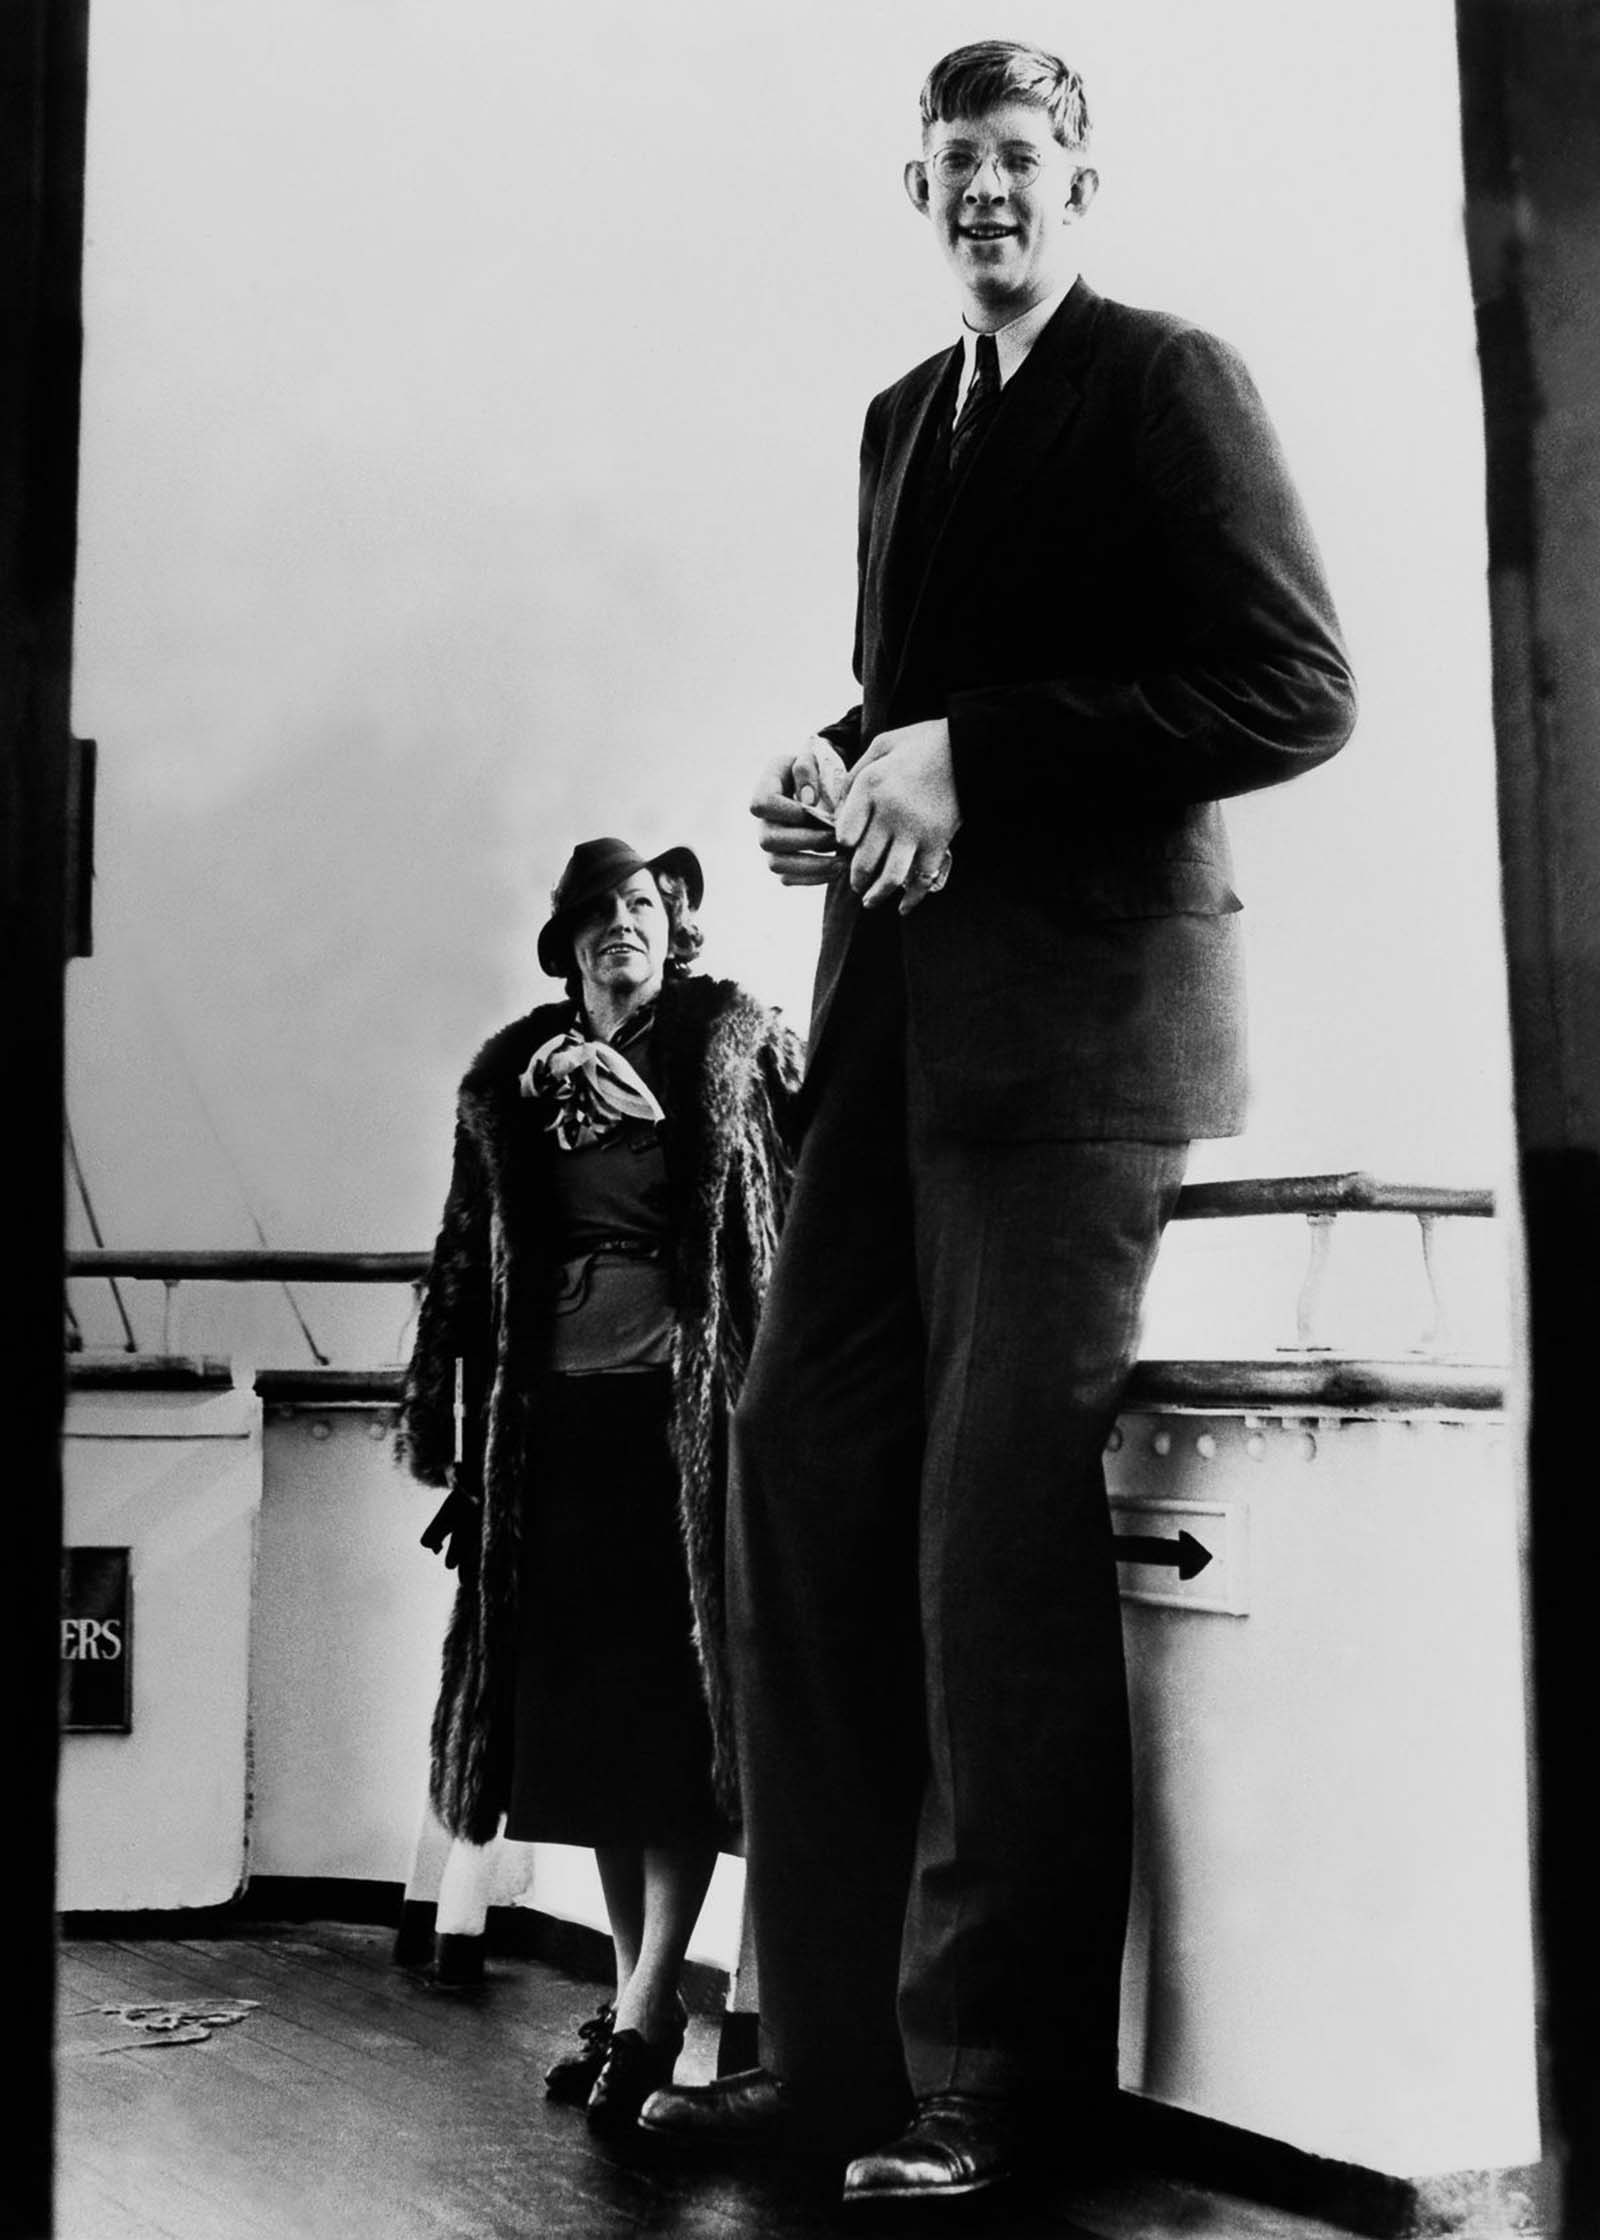 Wadlow travels aboard the Queen Mary, 1937.